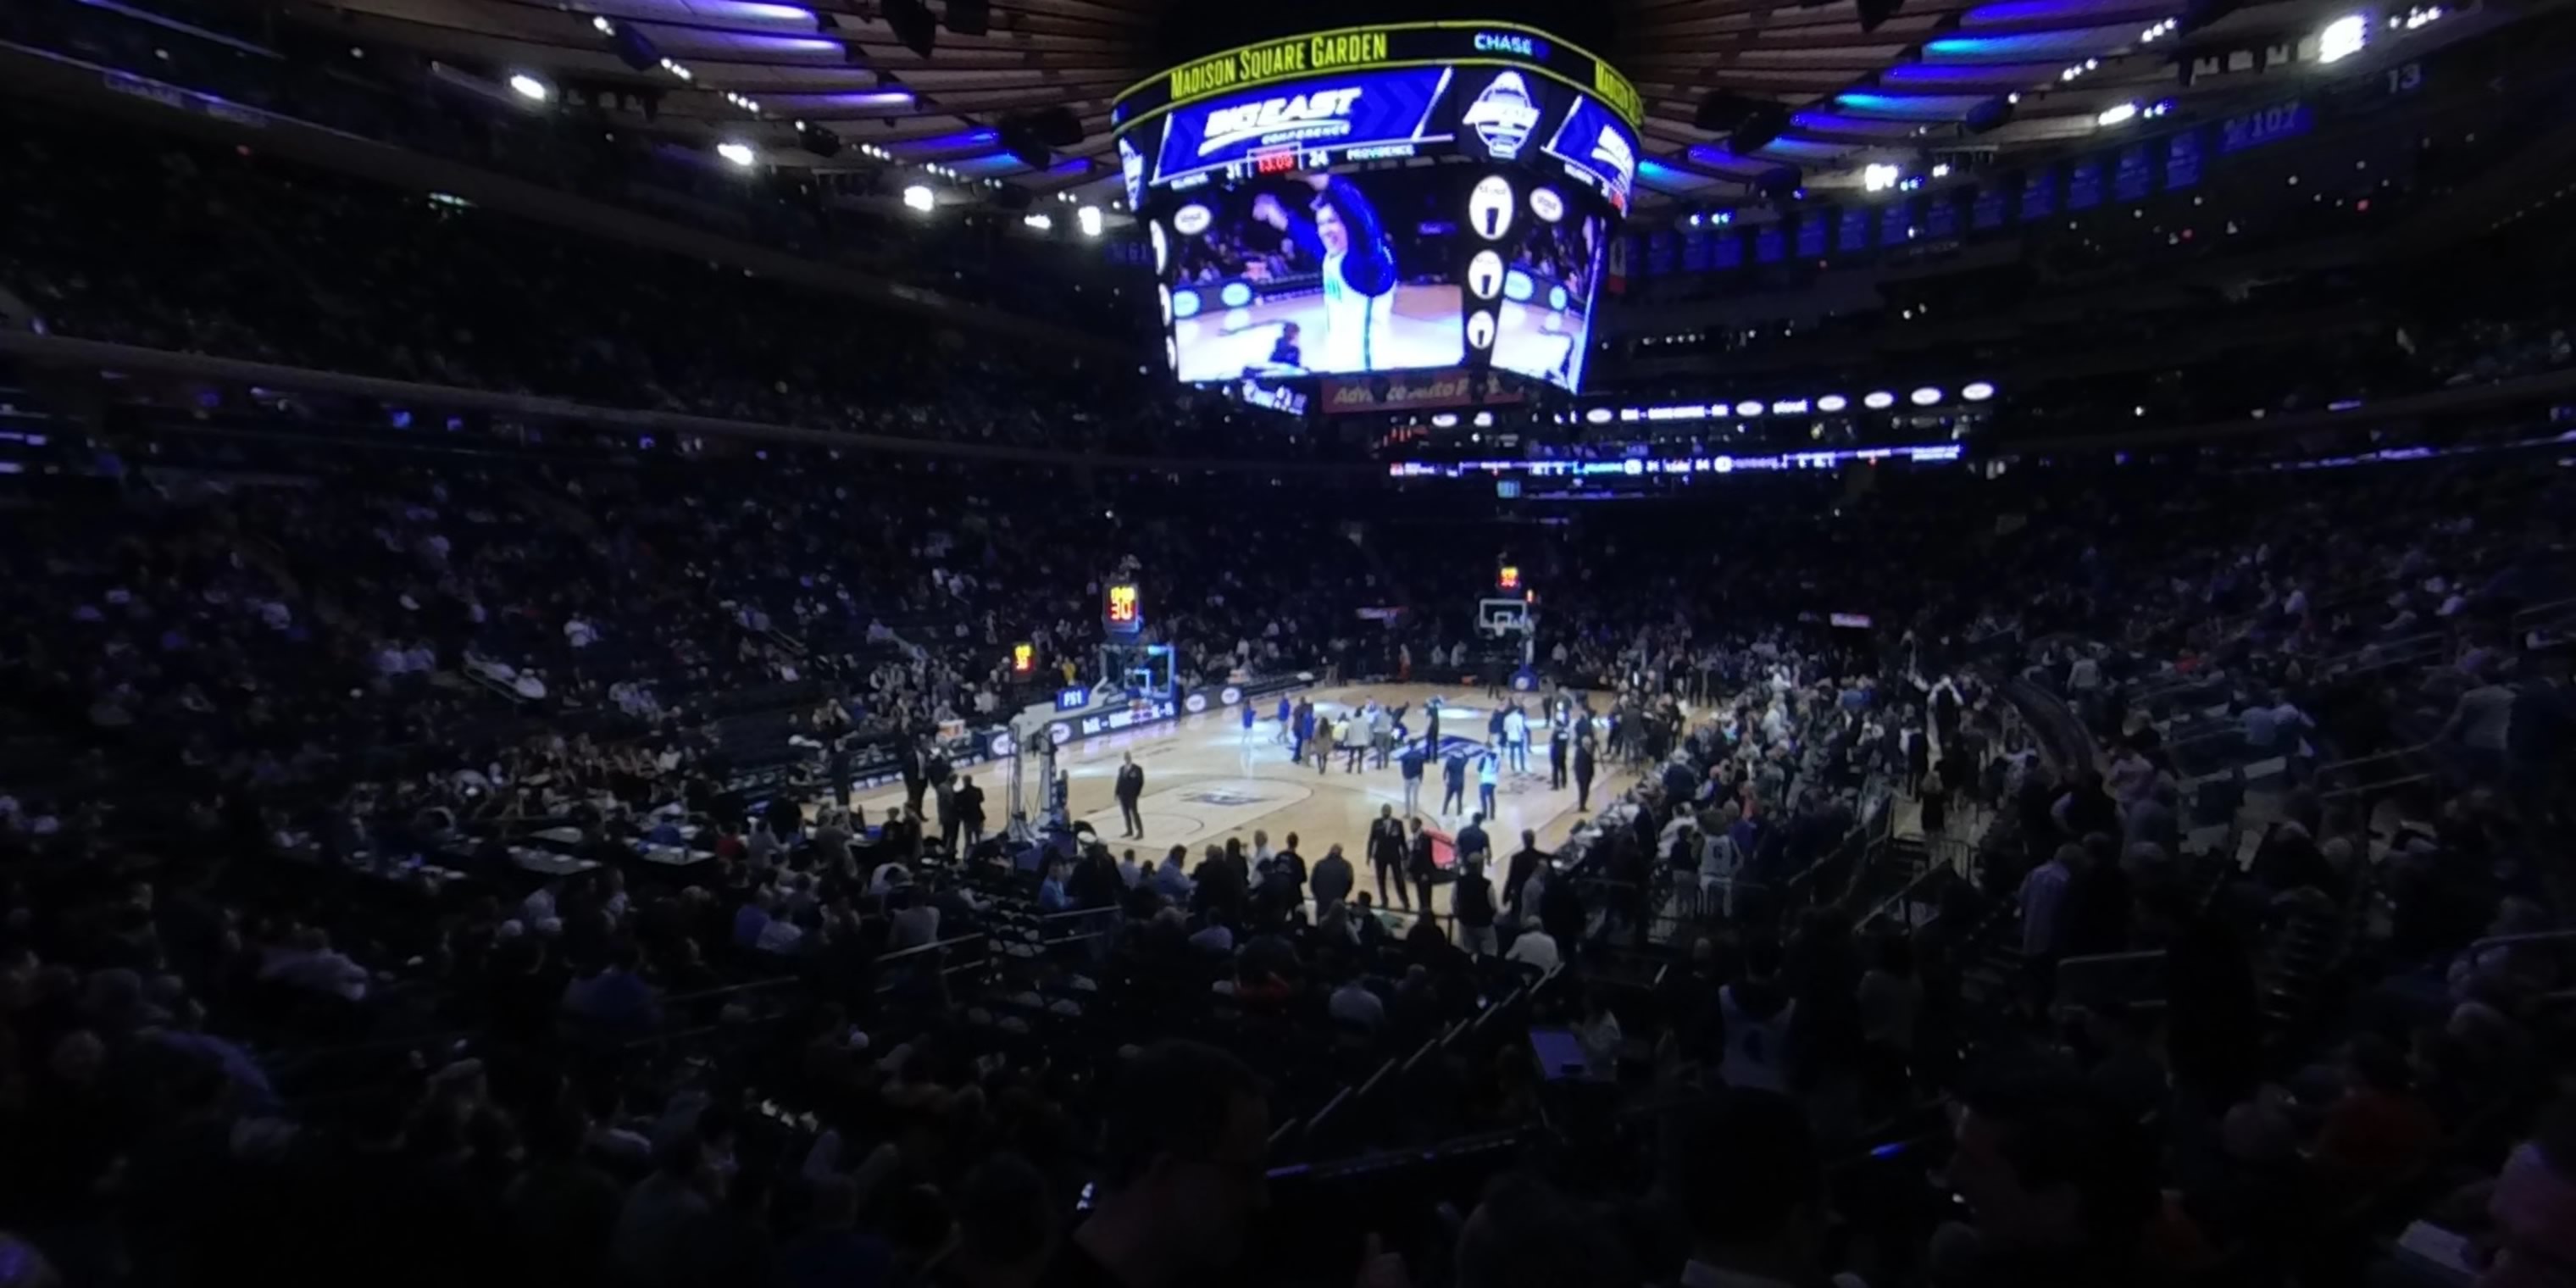 section 113 panoramic seat view  for basketball - madison square garden